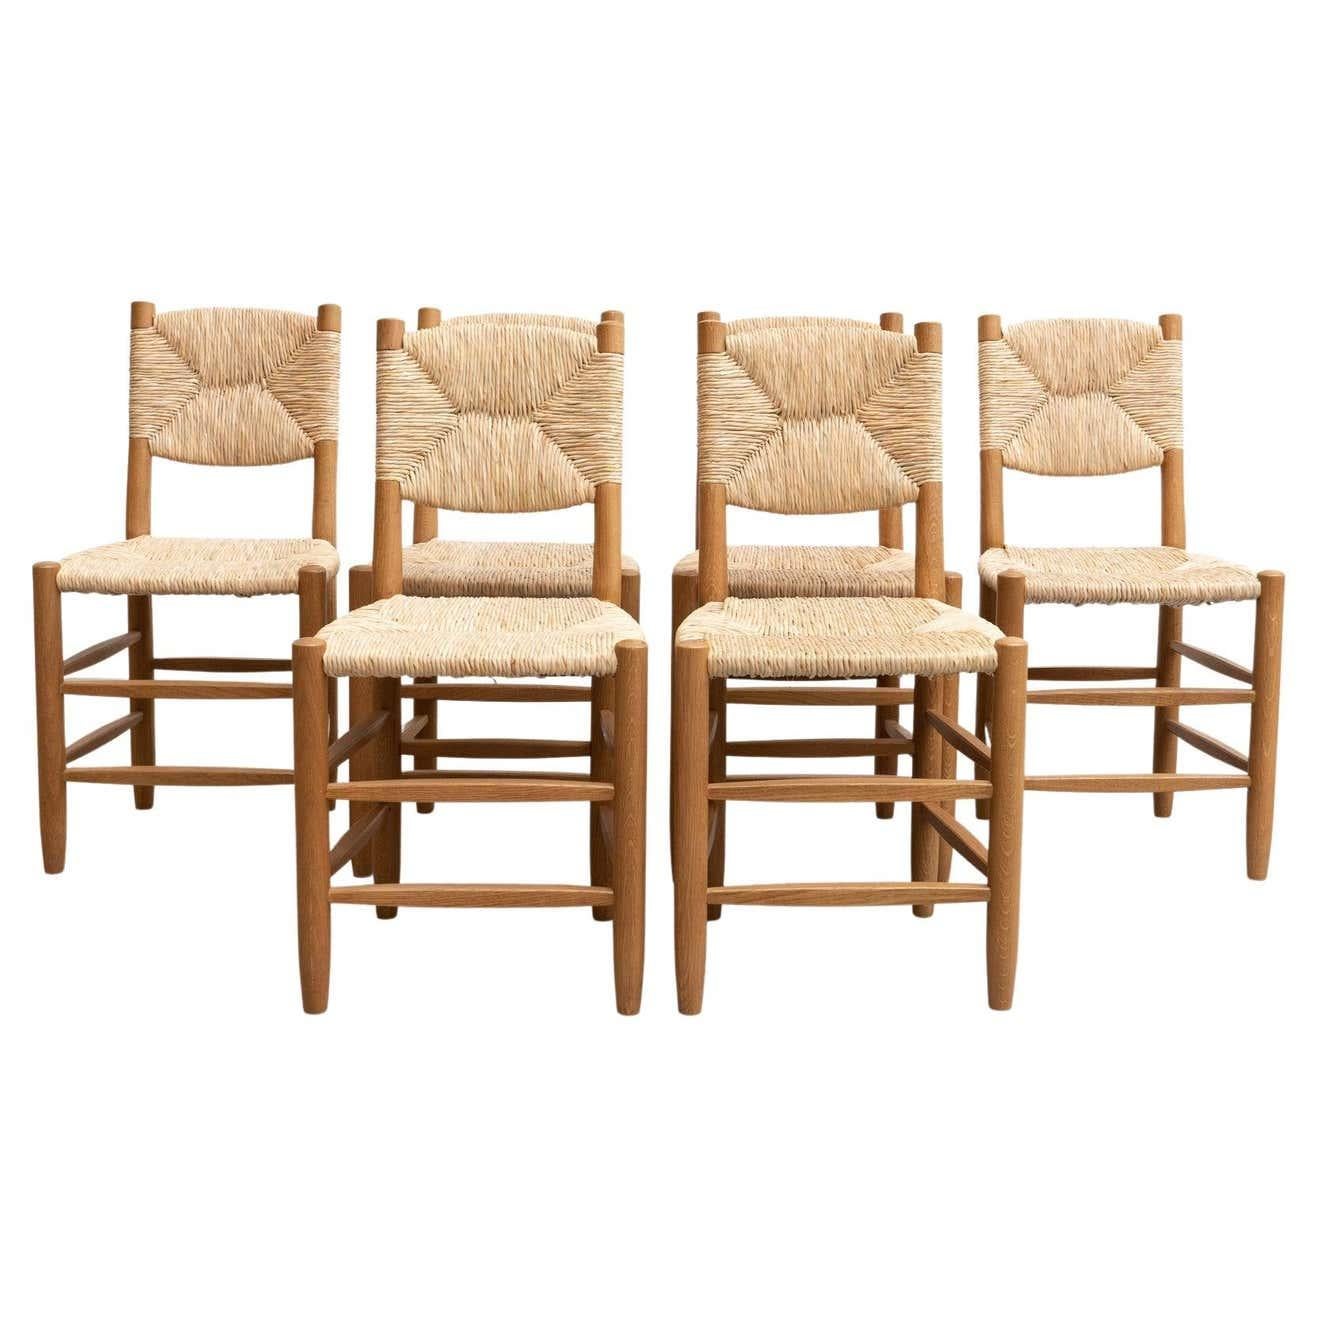 Set of Six After Charlotte Perriand N.19 Chairs, Wood Rattan, Mid-Century Modern For Sale 15